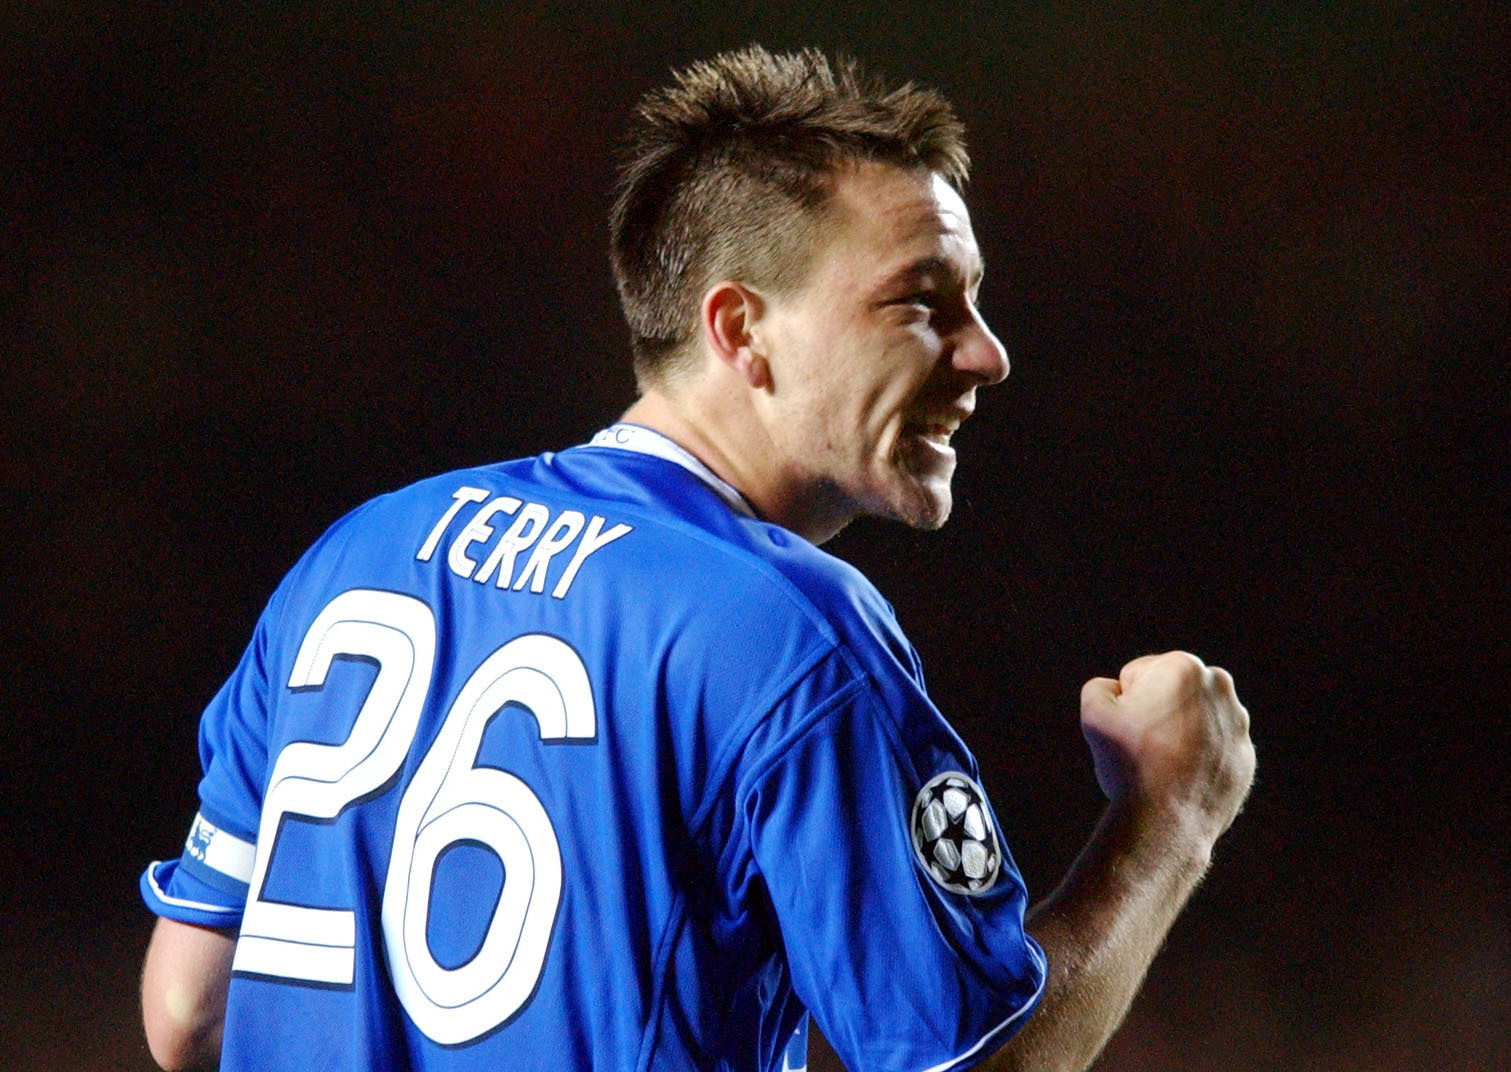 Happy Birthday John Terry  492 PL Appearances 311 Wins  41 Goals

What a player 